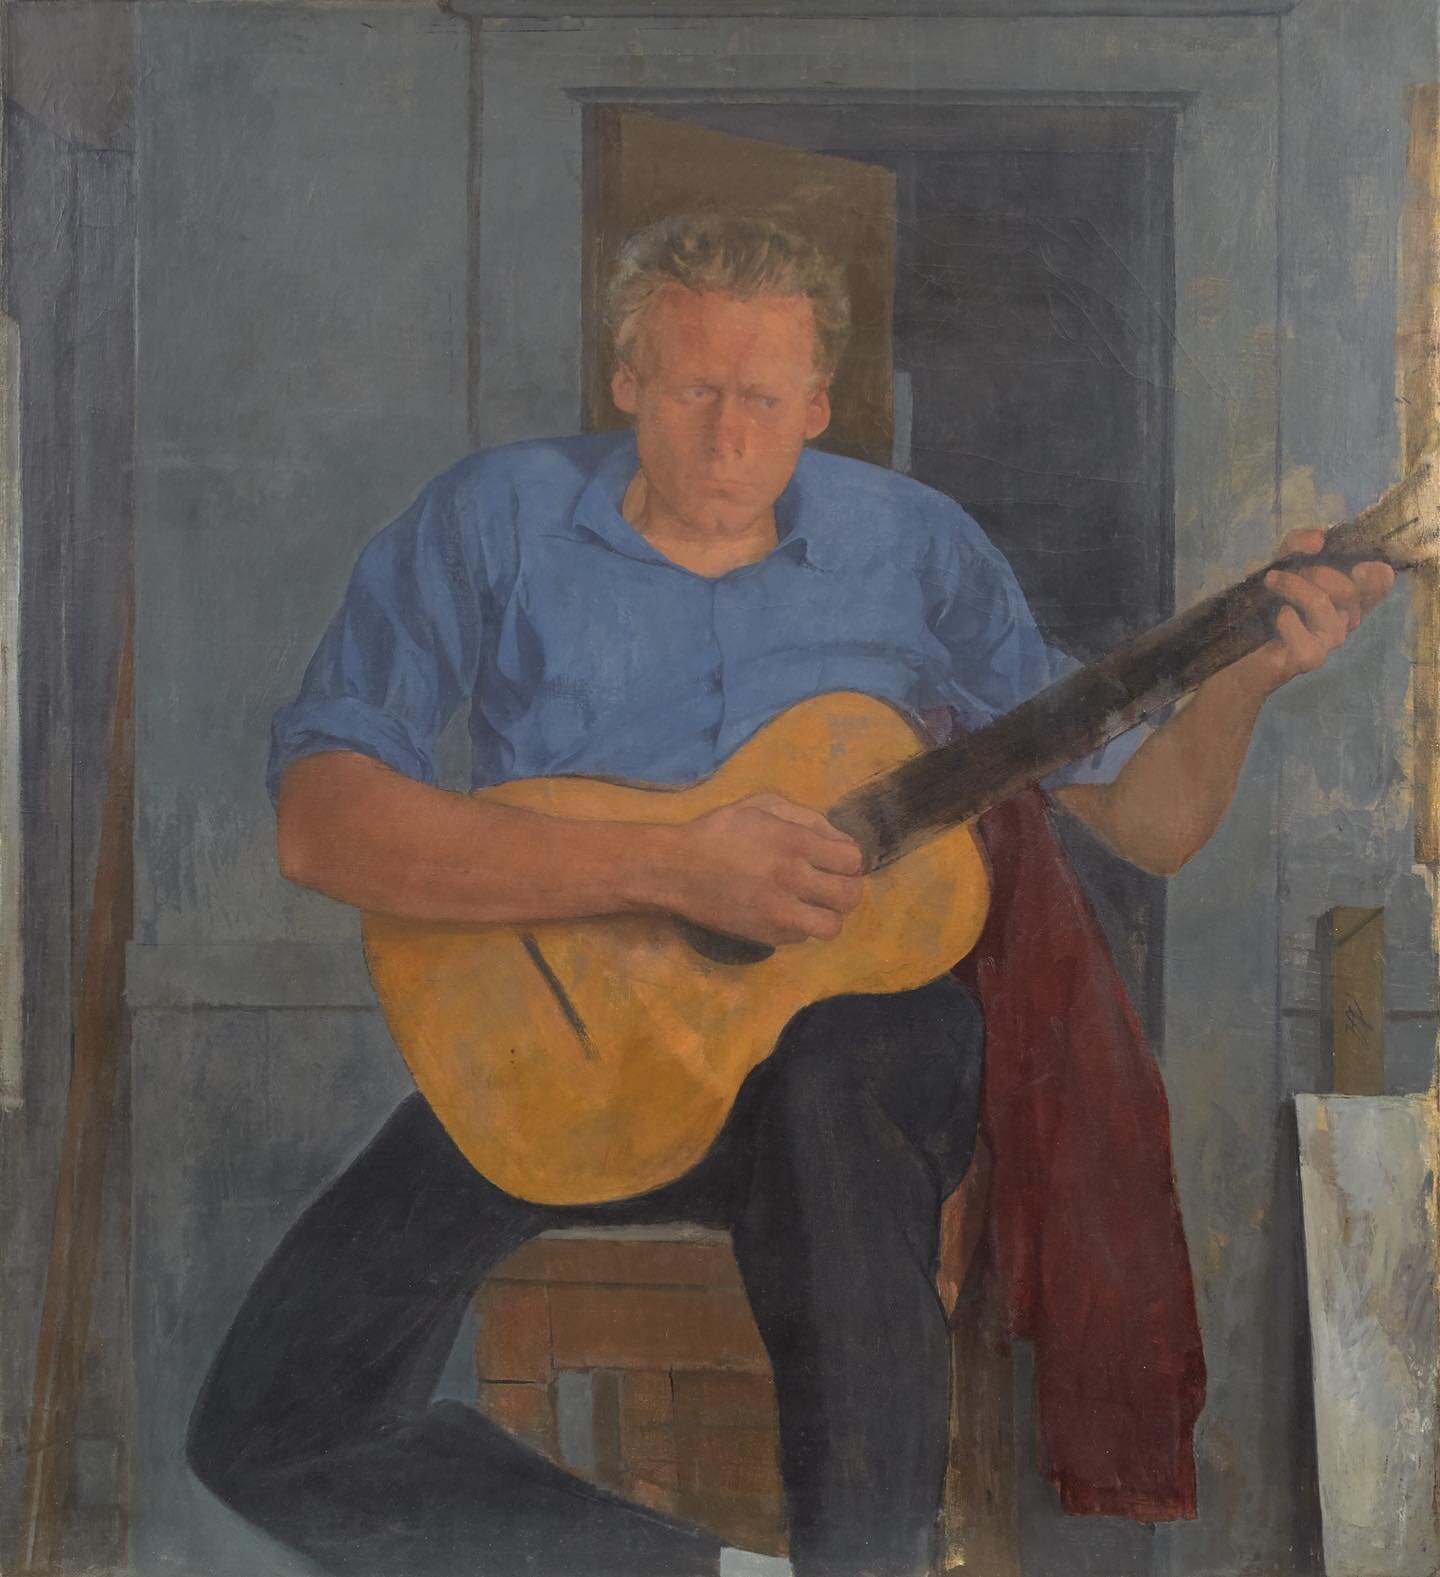 Lennart Anderson &ldquo;Portrait of Henry Kowert&rdquo; (1955&ndash;58) Oil on canvas, 46 x 42 in. Collection of the Estate